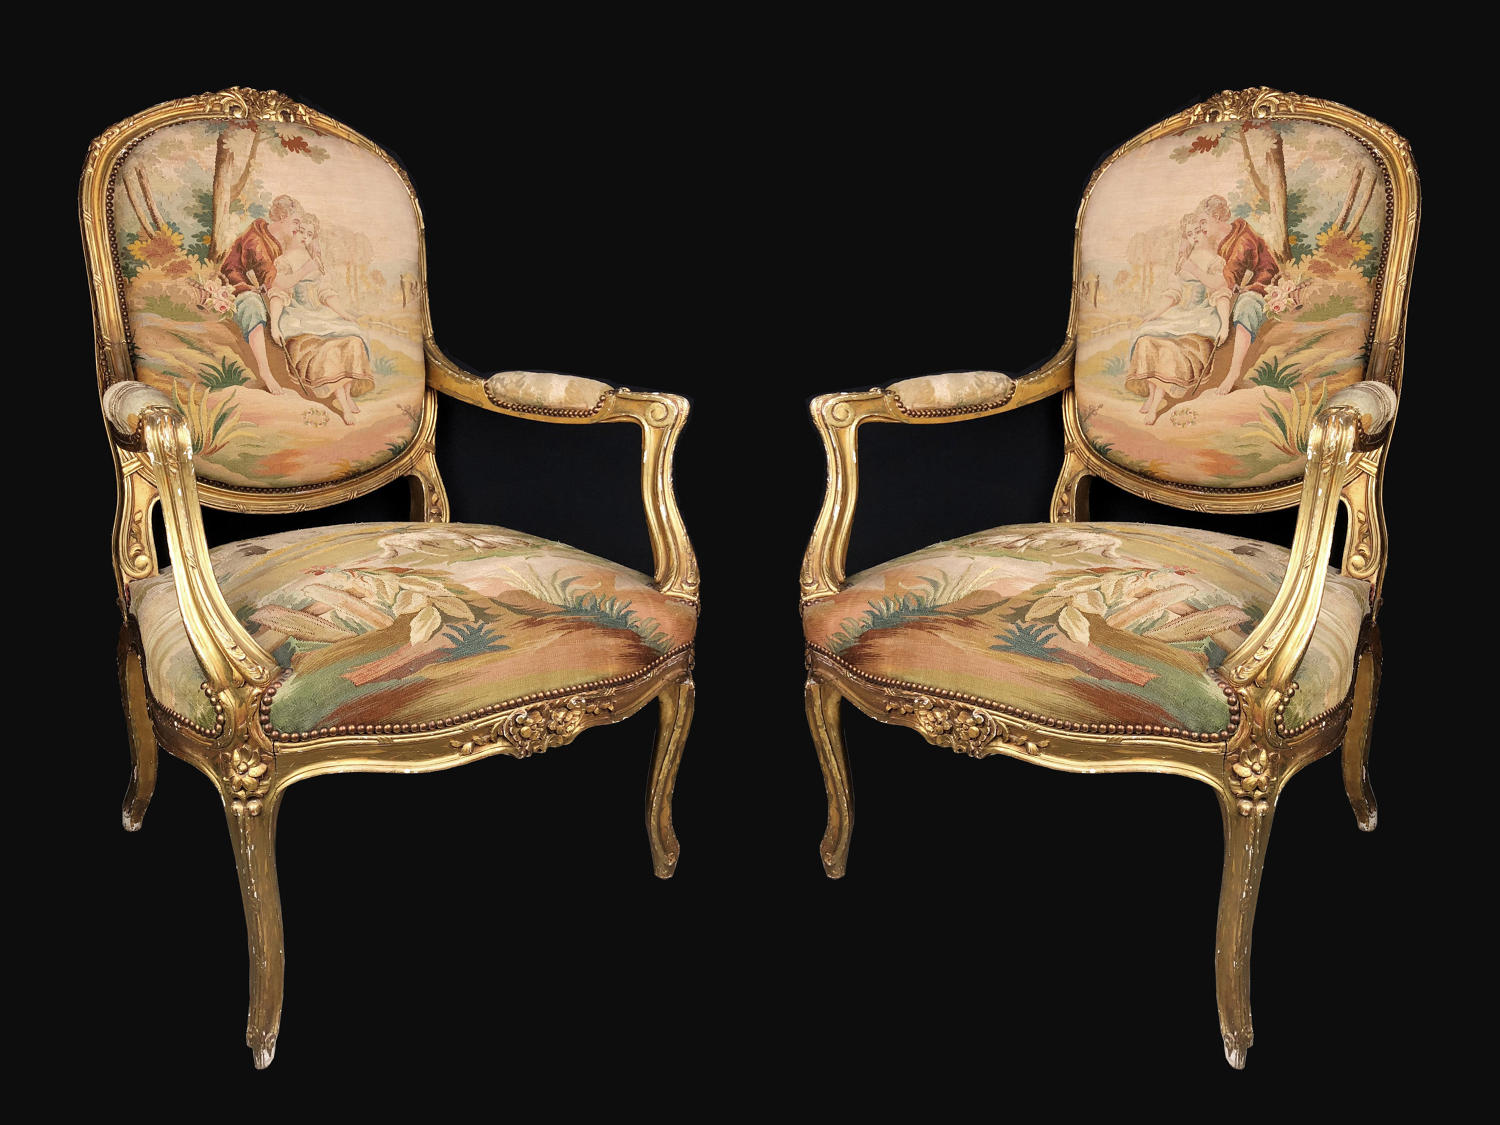 A pair of gilt-wood and Beauvais / Aubusson tapestry chairs